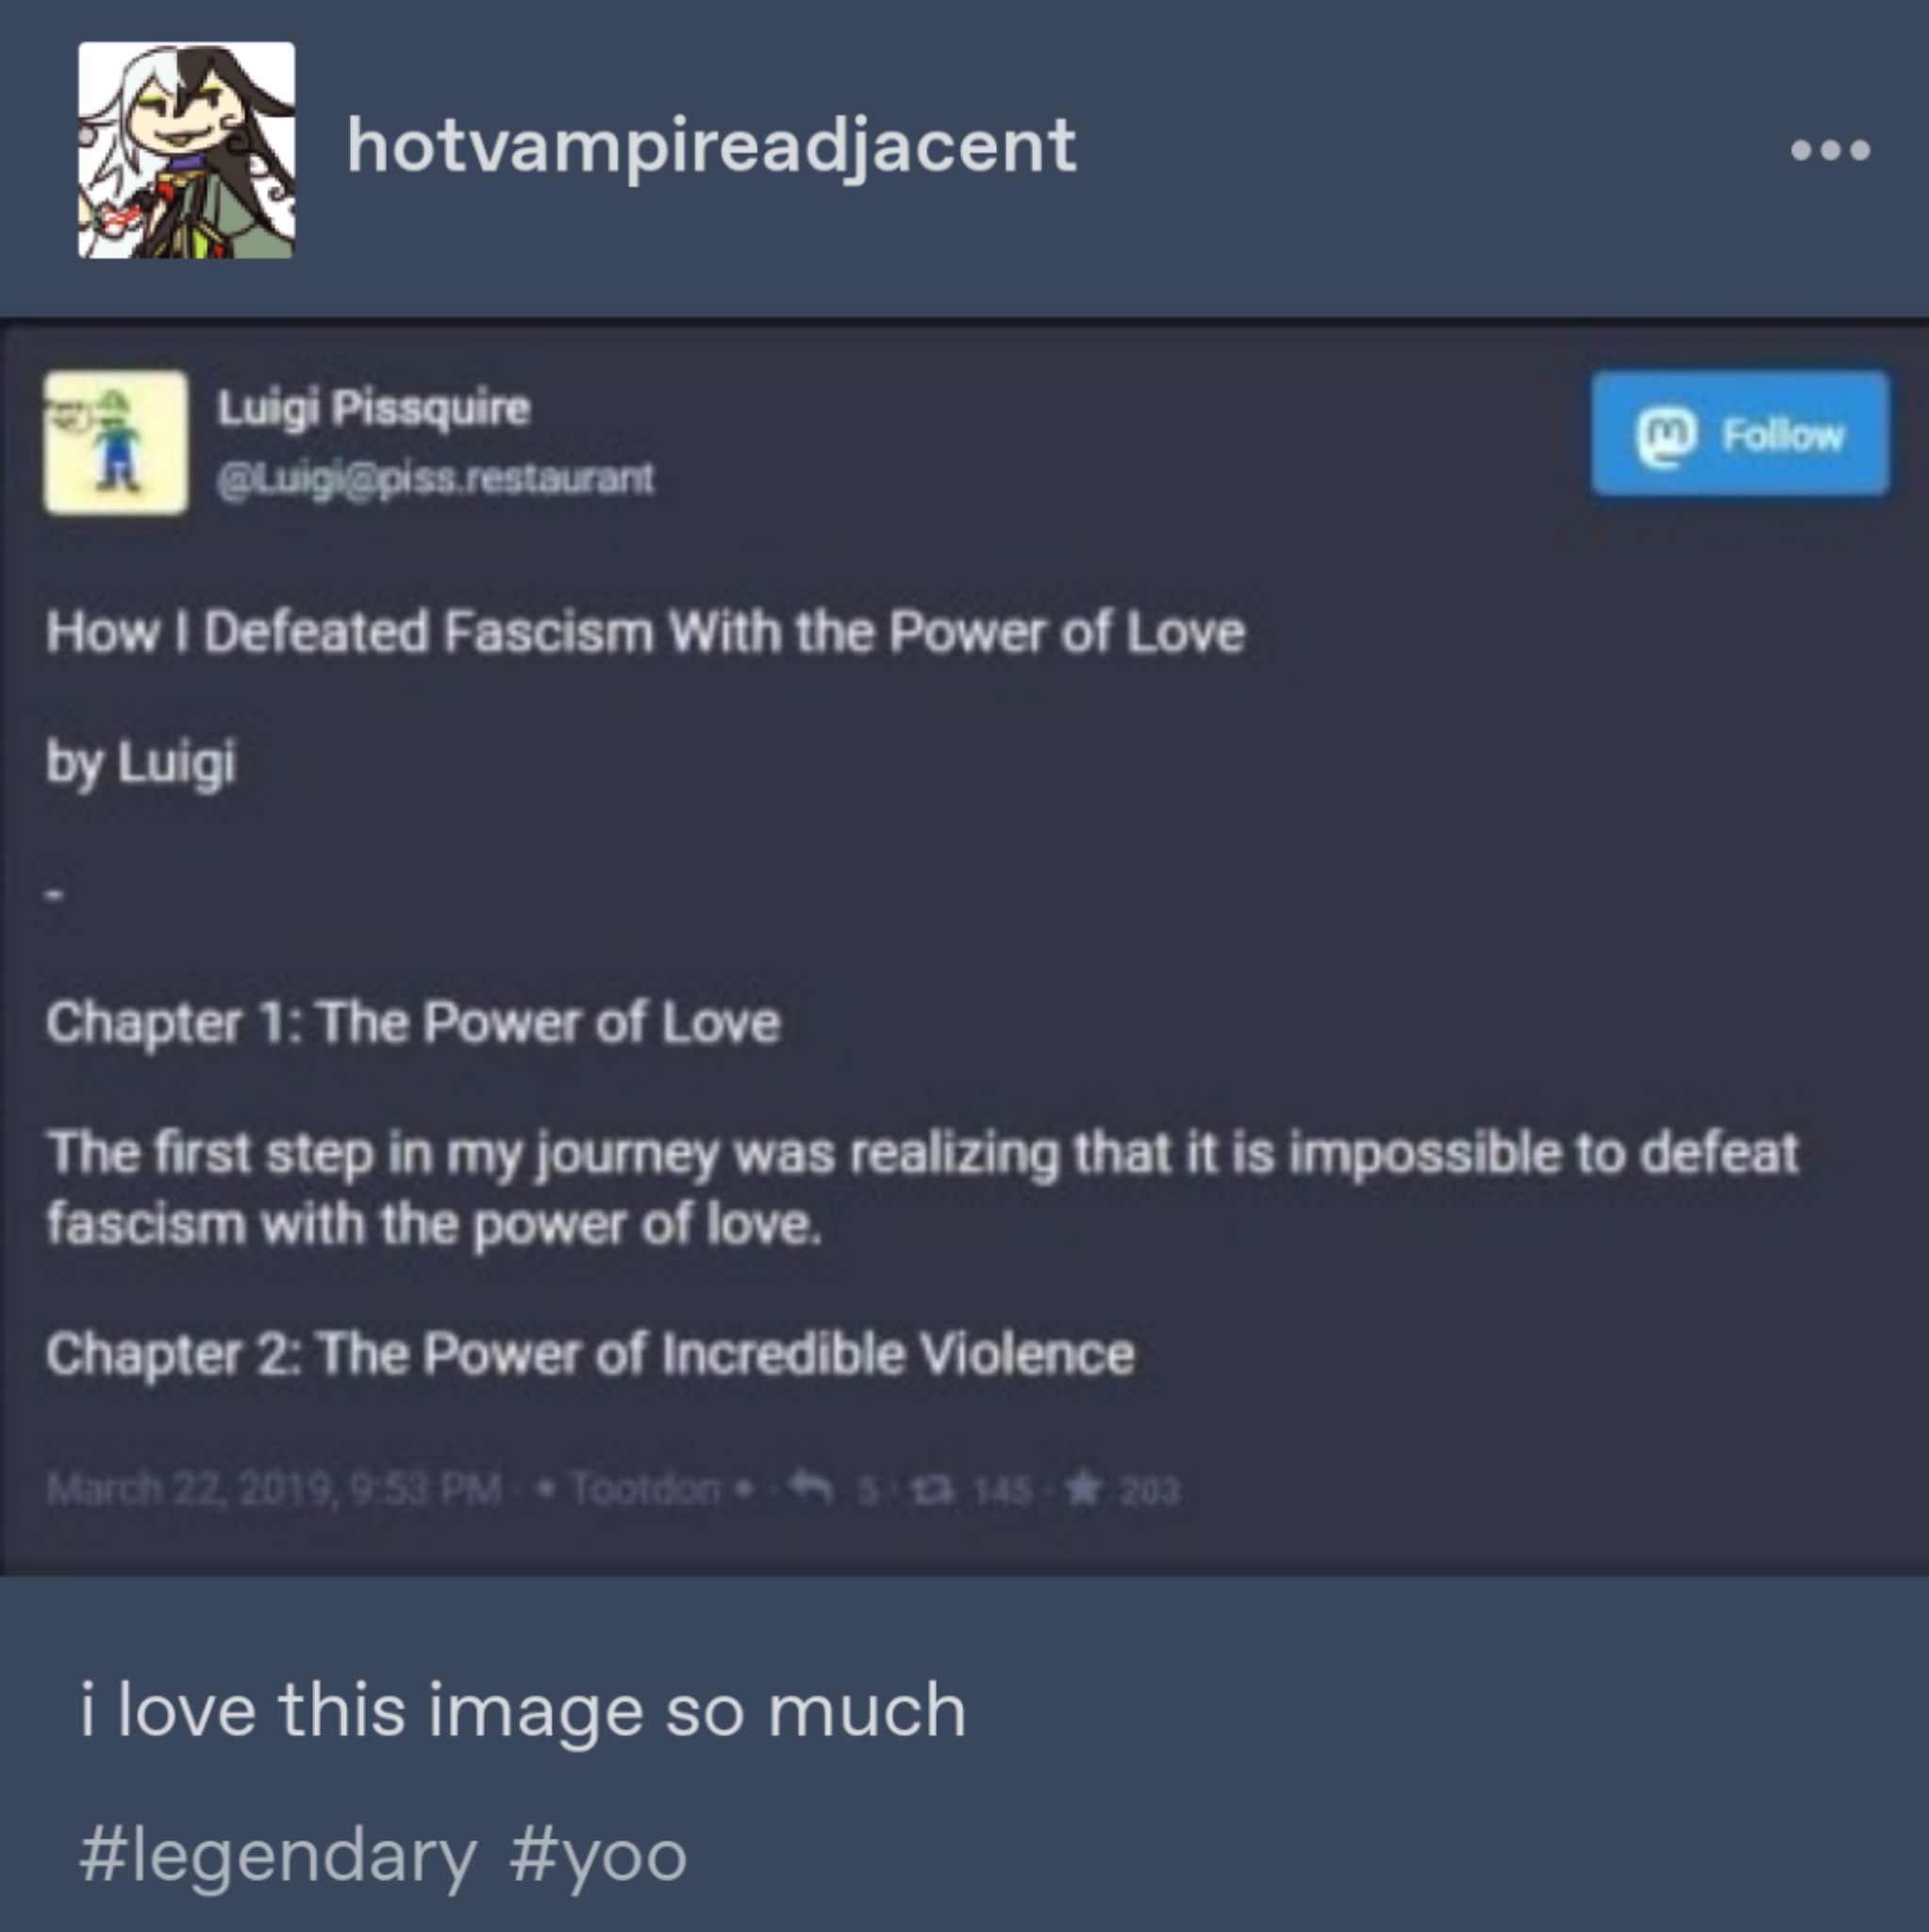 screenshot - hotvampireadjacent Luigi Pissquire Sluigi piss.restaurant 3 How I Defeated Fascism With the Power of Love by Luigi Chapter 1 The Power of Love The first step in my journey was realizing that it is impossible to defeat fascism with the power o